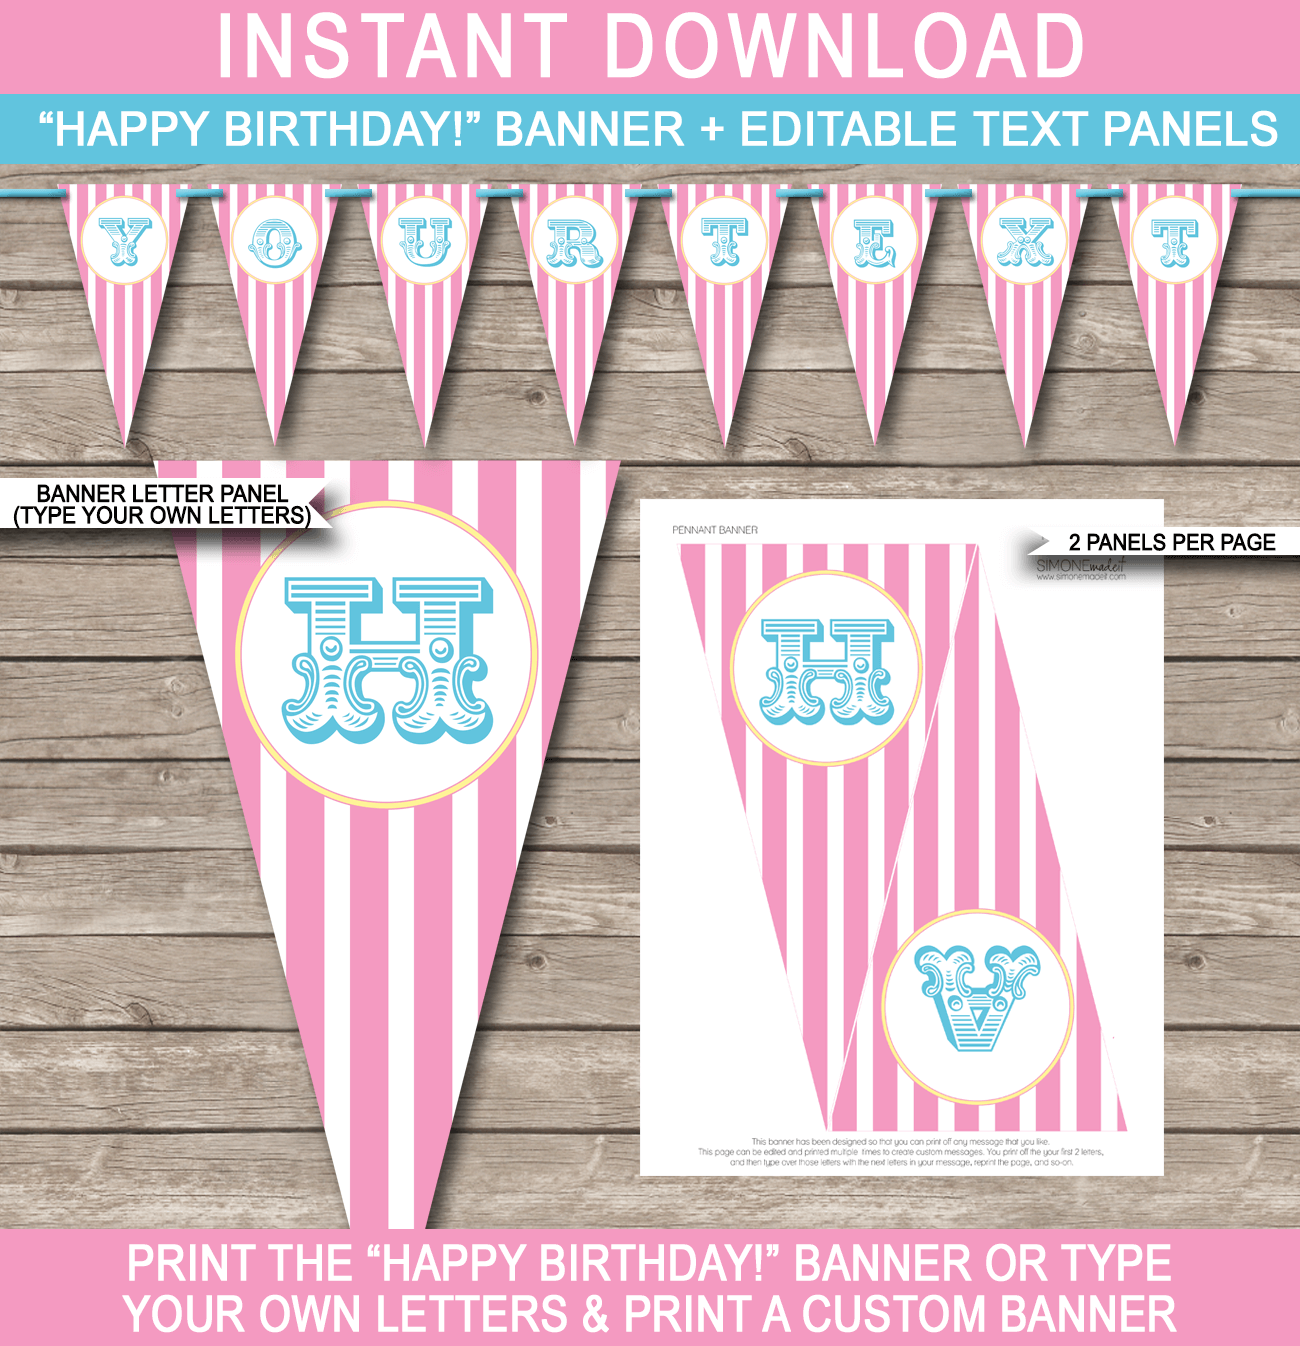 Aqua Pink Carnival Banner Template - Carnival Bunting - Circus -  Happy Birthday Banner - Birthday Party - Editable and Printable DIY Template - INSTANT DOWNLOAD $4.50 via simonemadeit.com